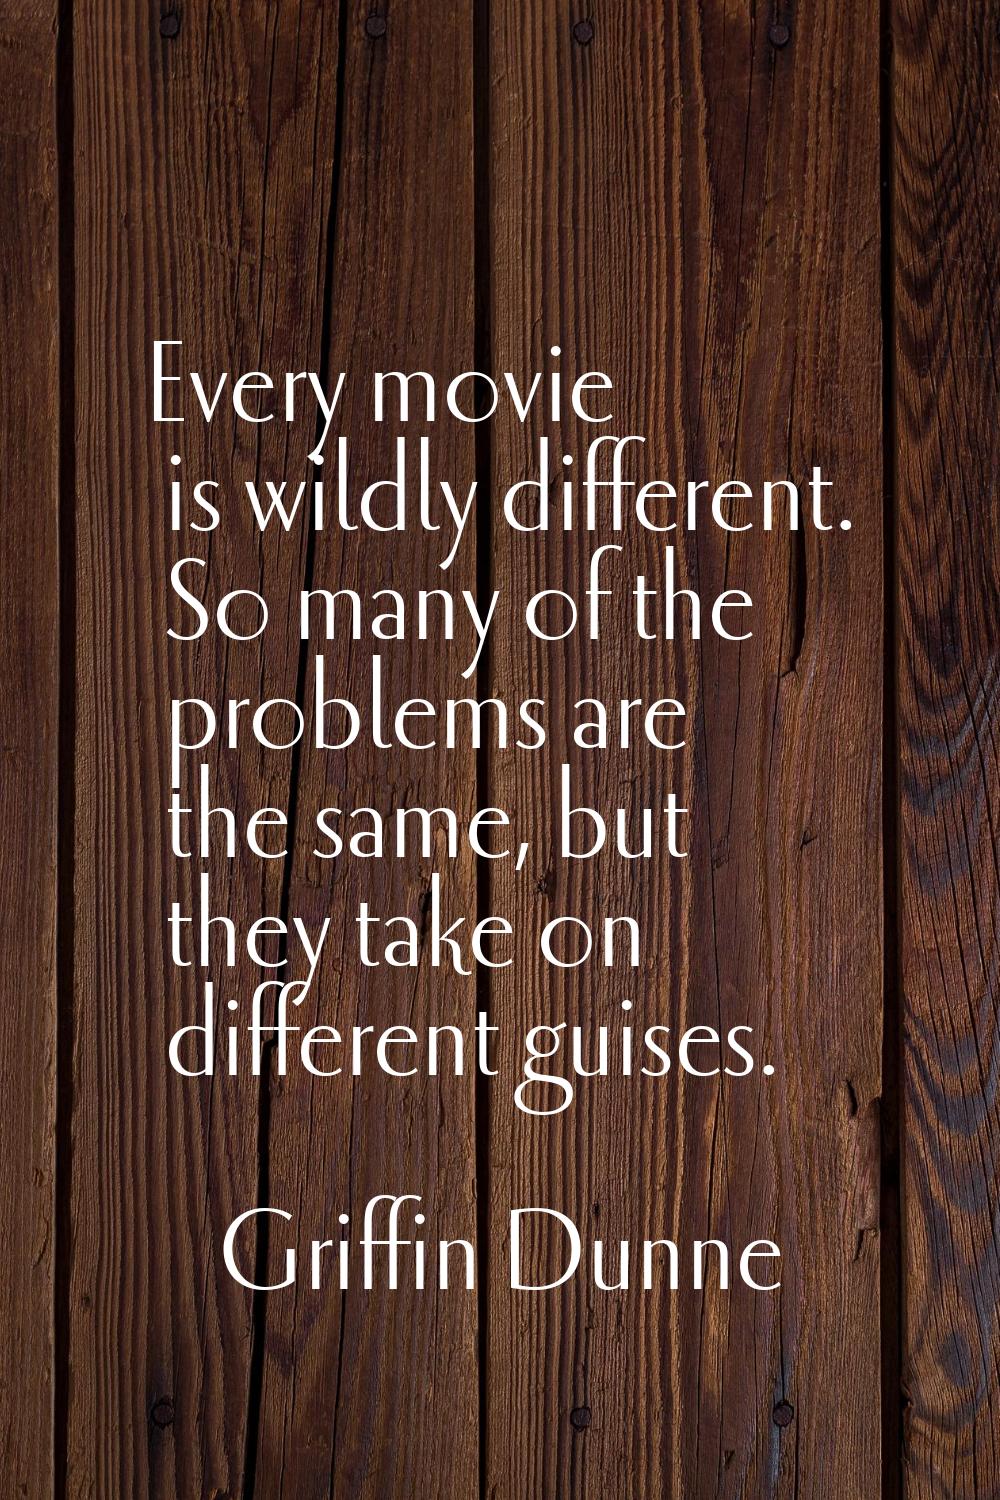 Every movie is wildly different. So many of the problems are the same, but they take on different g